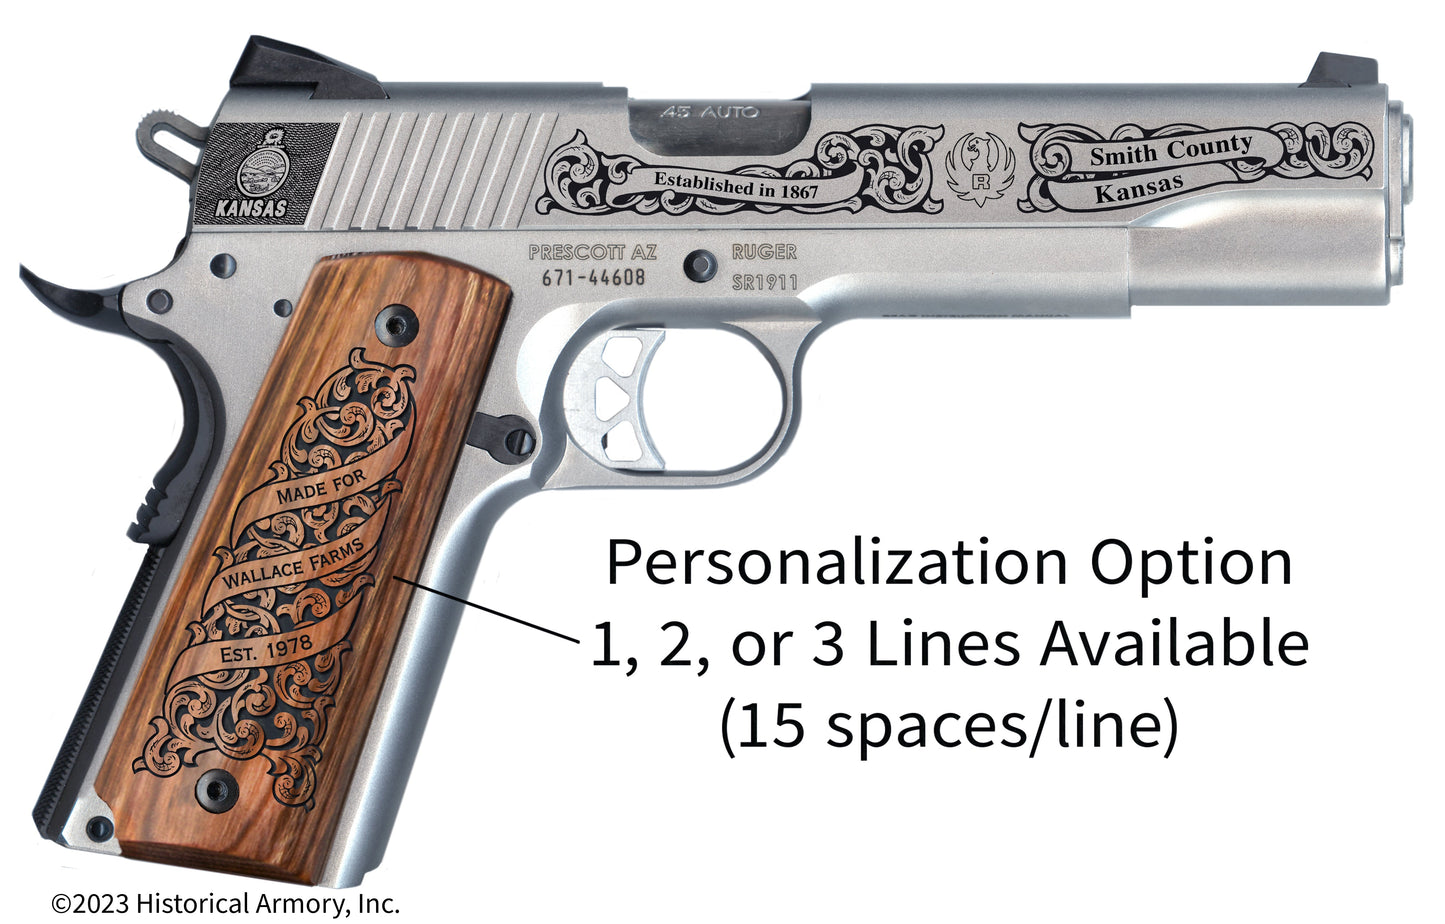 Smith County Kansas Personalized Engraved .45 Auto Ruger 1911